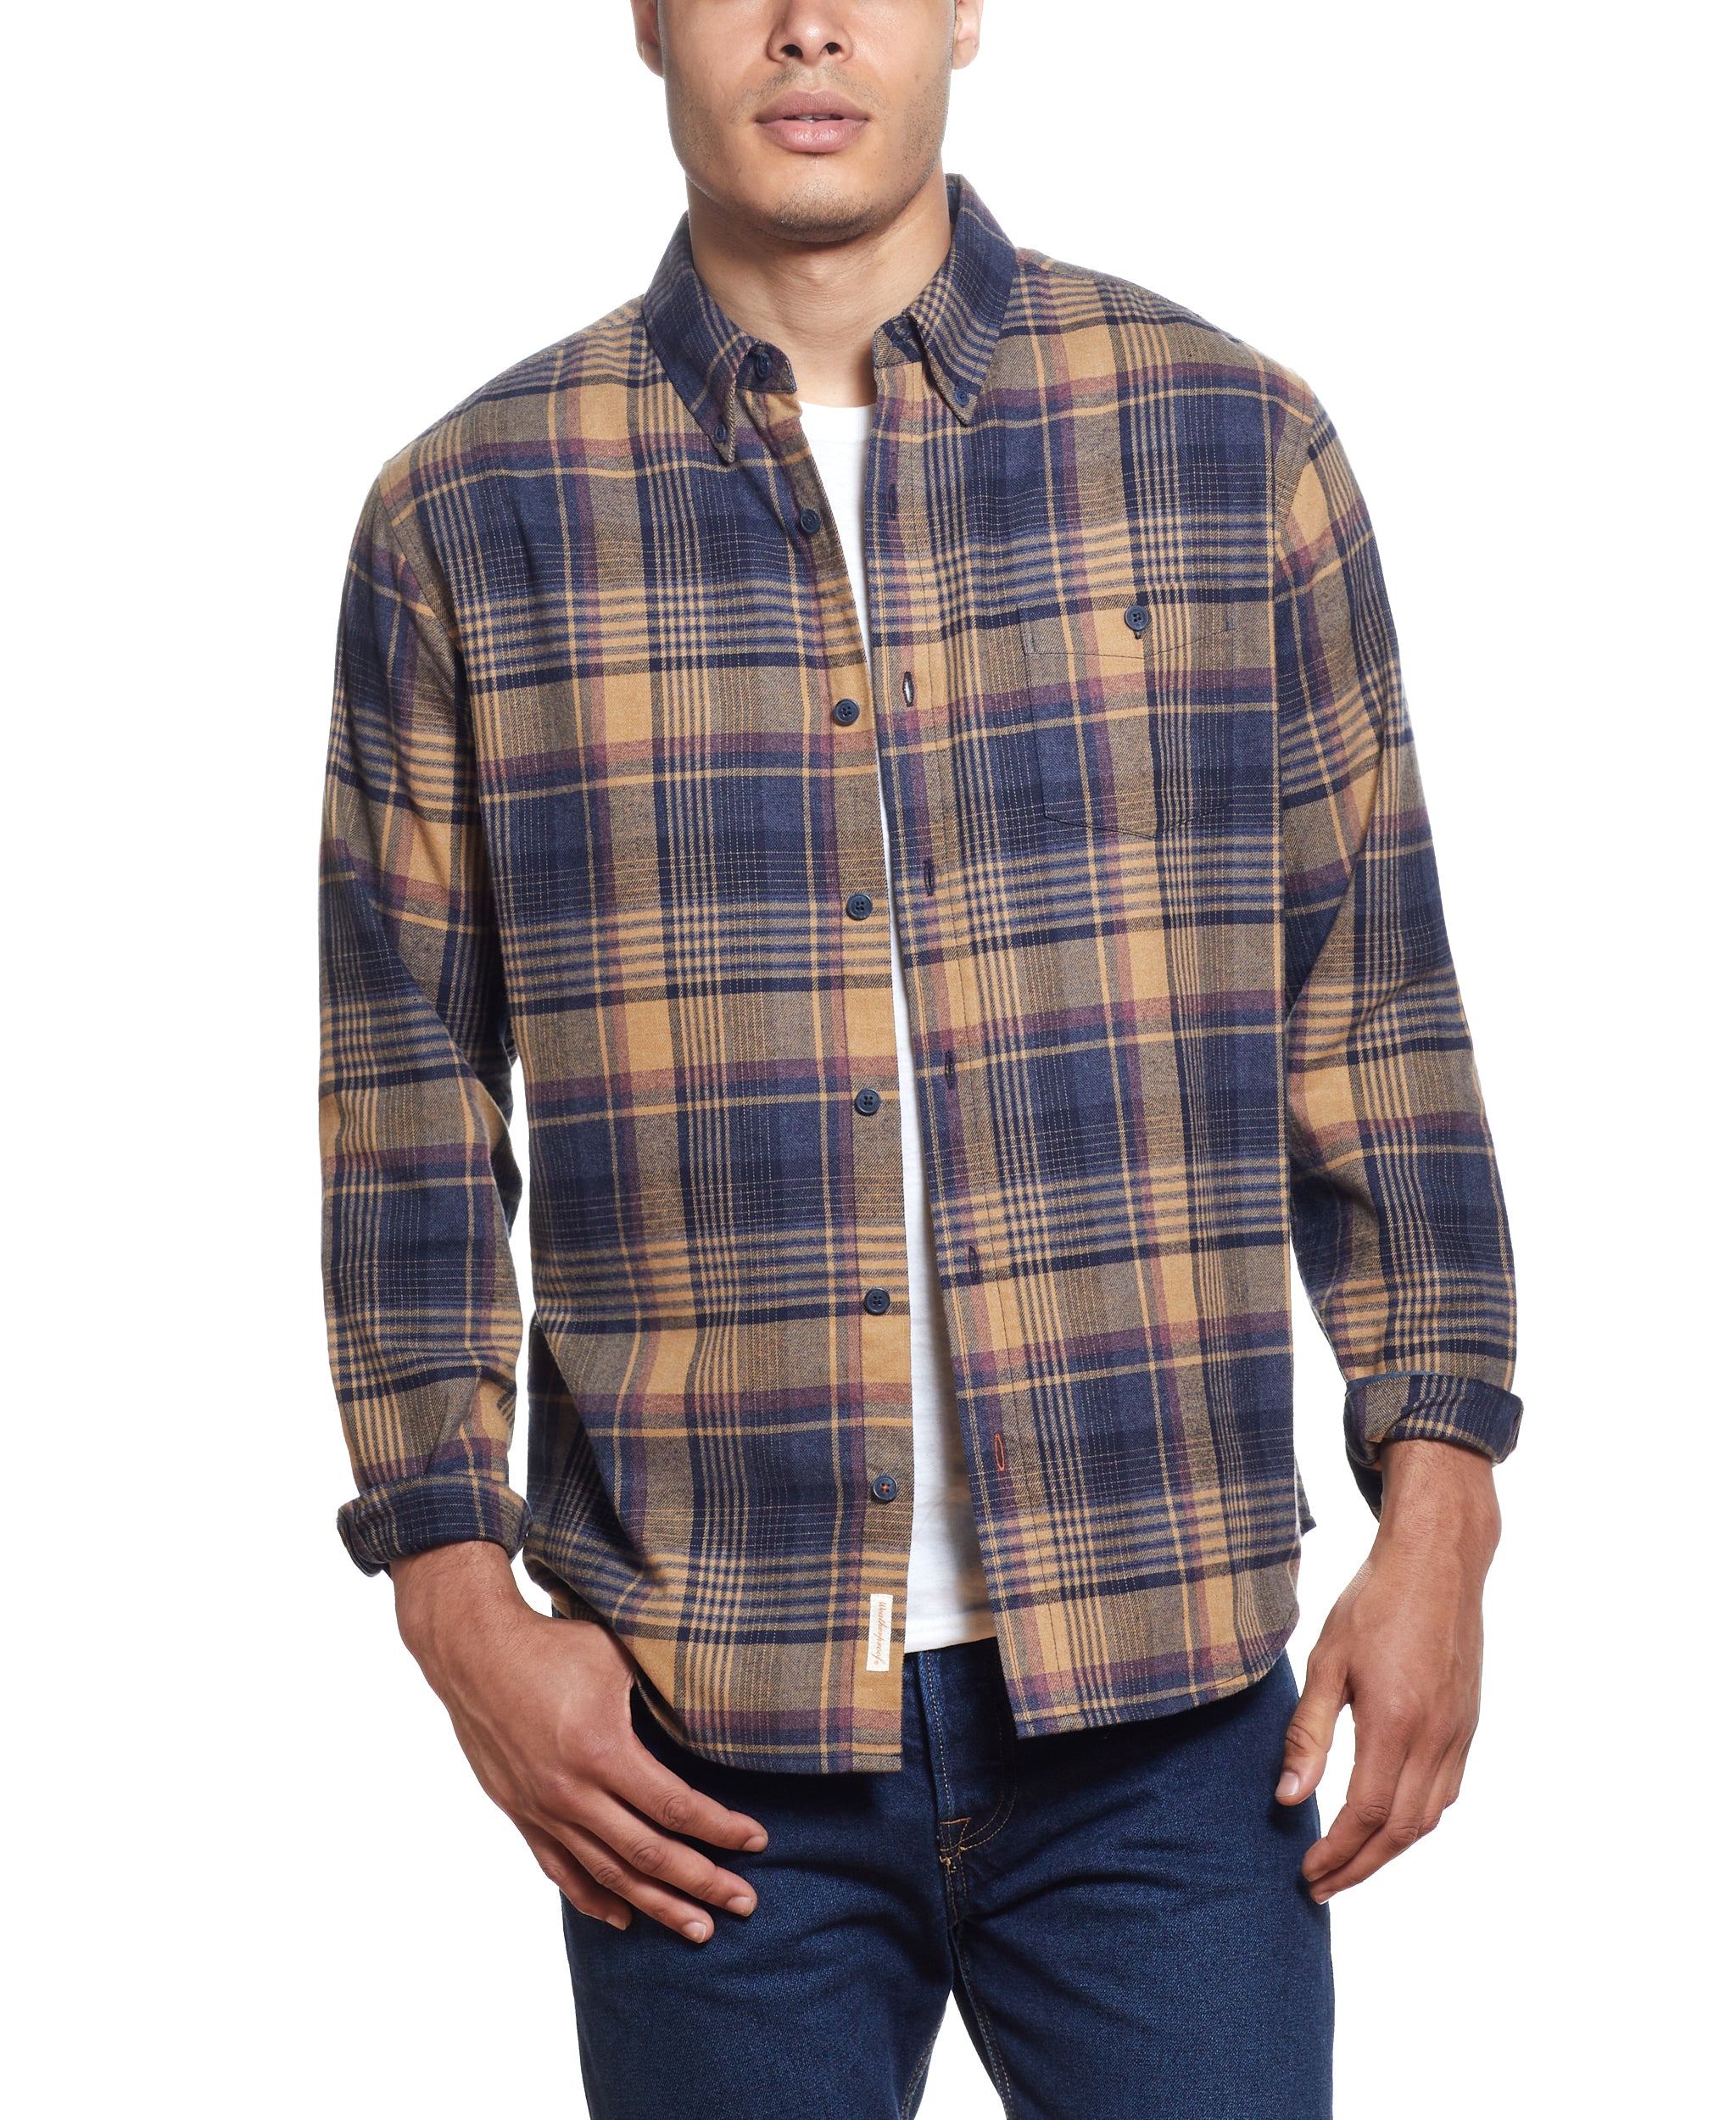 Long Sleeve ANTIQUE PLAID flannel IN BROWN